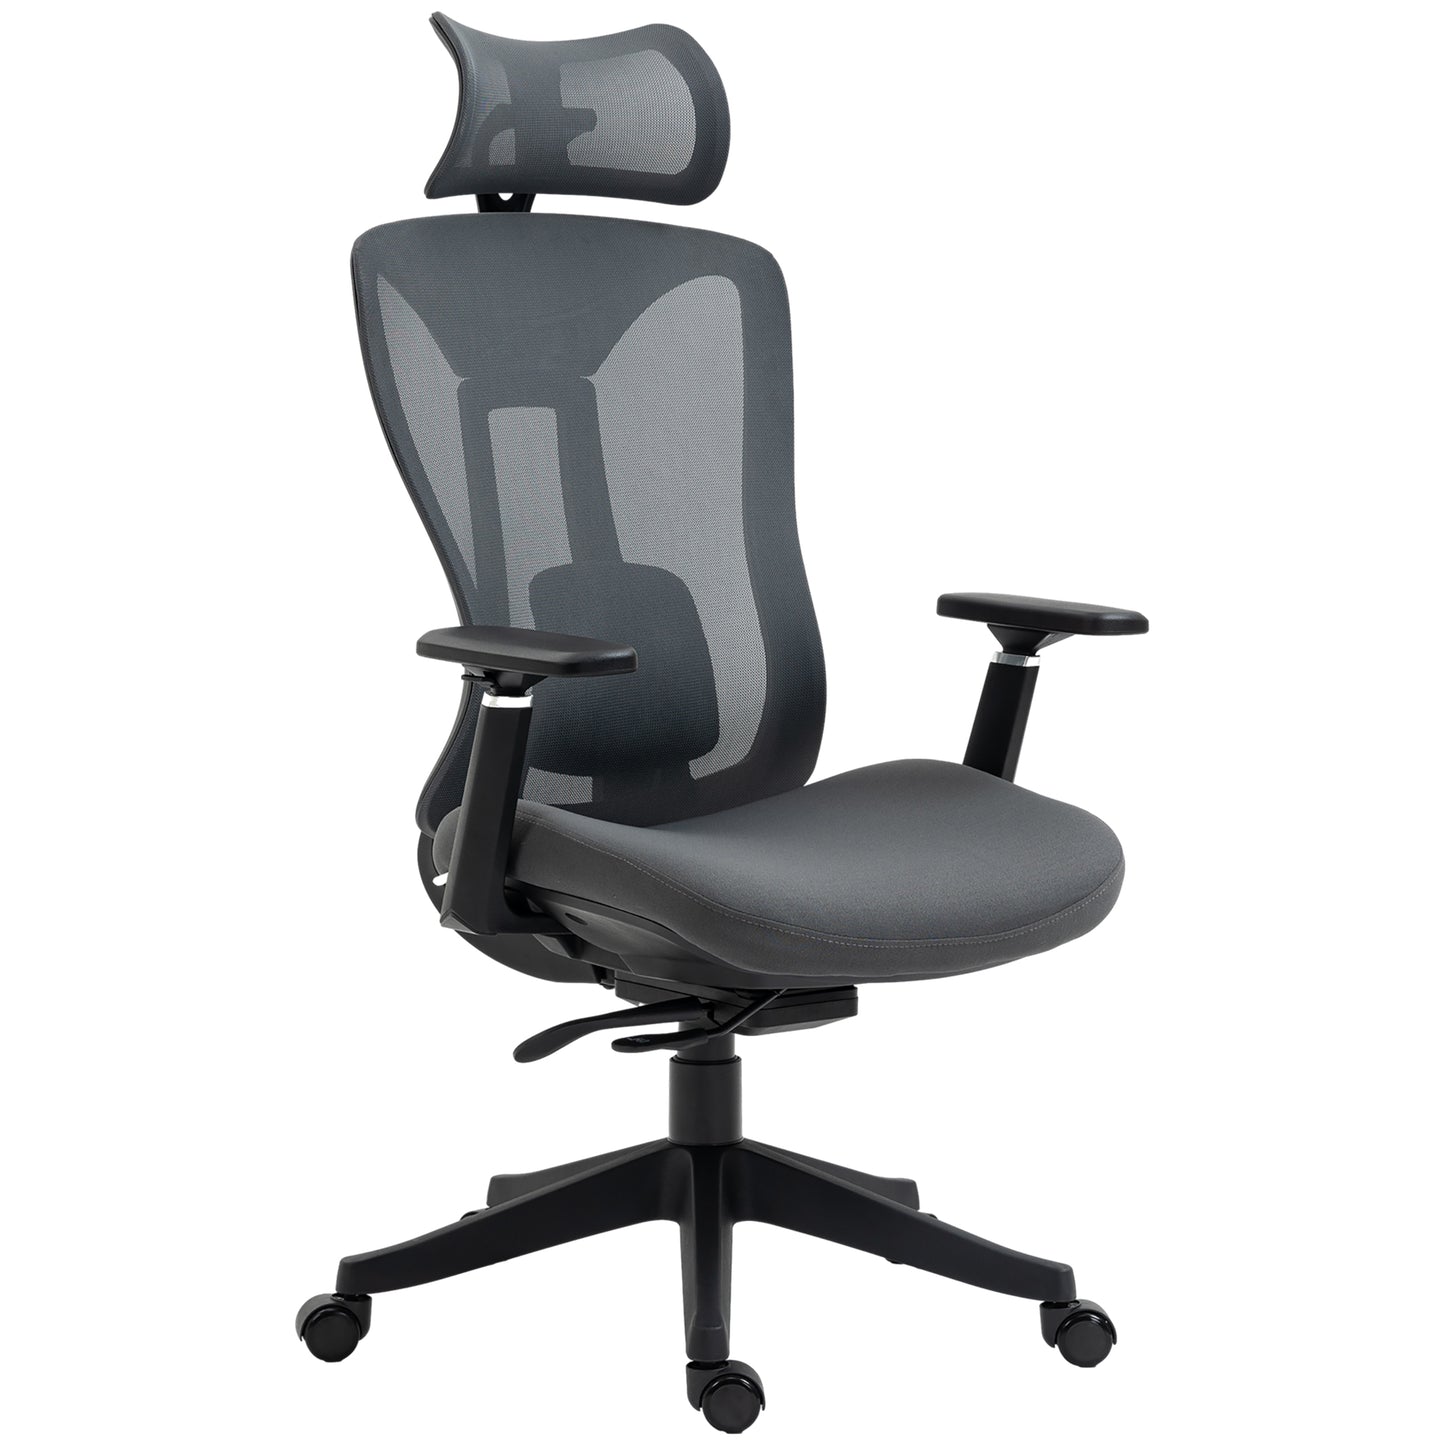 Ergonomic Office Chair, Home Office Mesh Chair with Lumbar Support,3D  Armrests and Adjustable Headrest, Computer Desk Chair High Back for Heavy  People